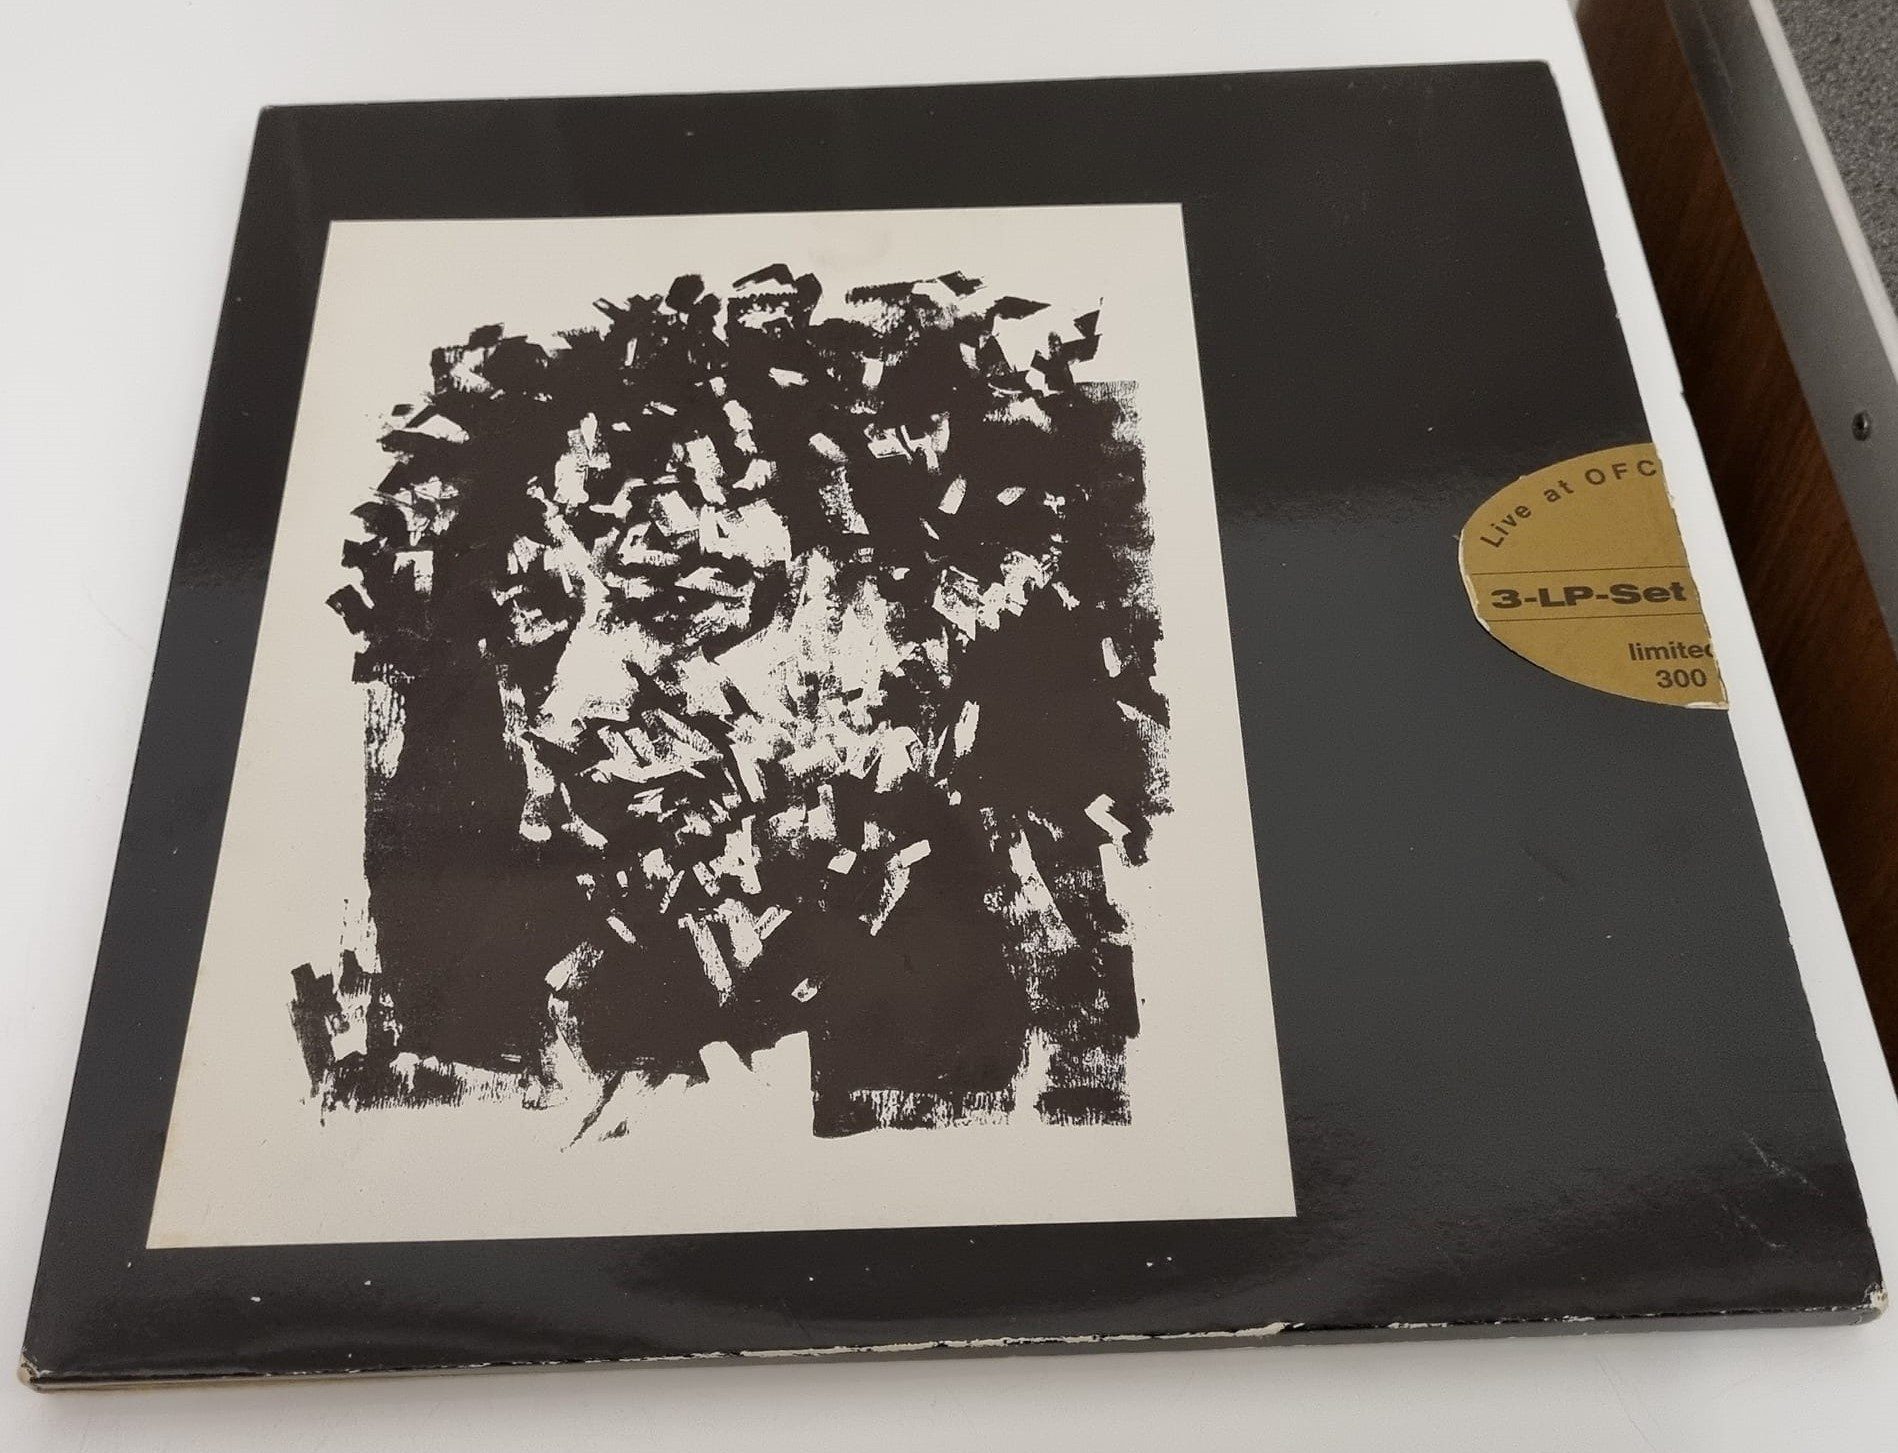 Buy this rare Bob Dylan And Band record by clicking here